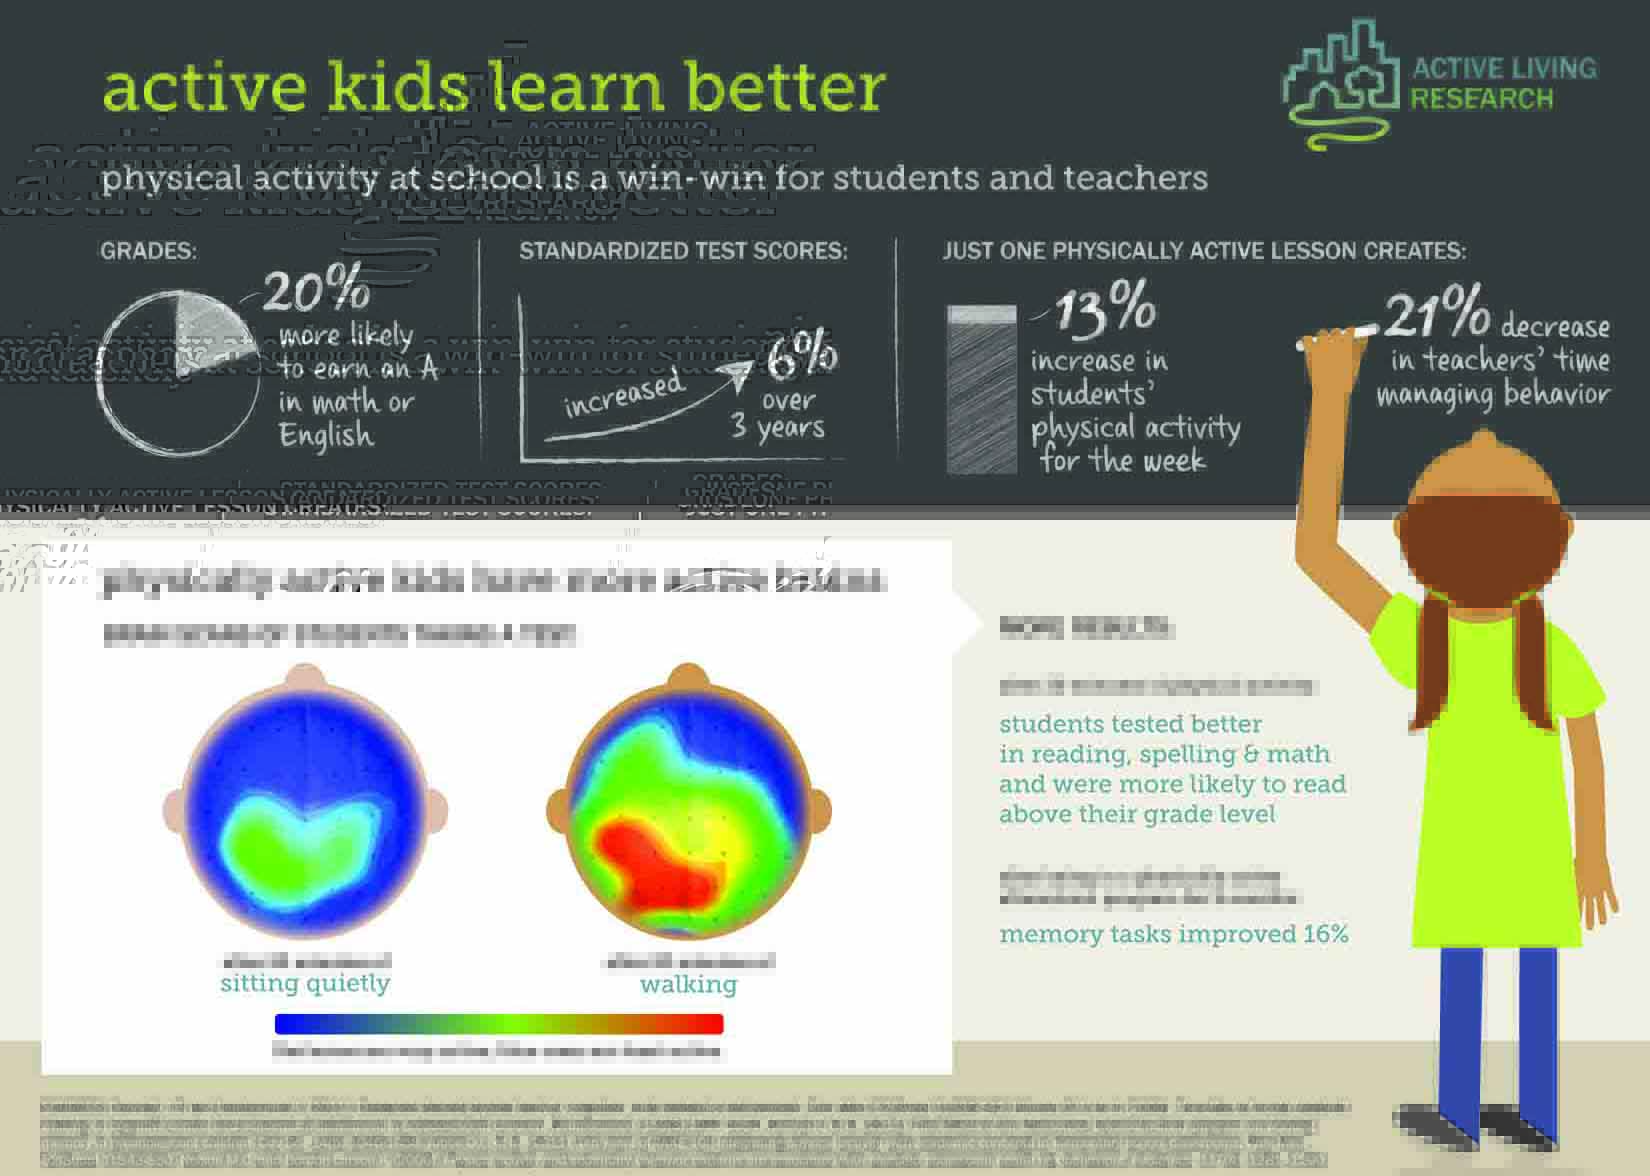 active kids learn better